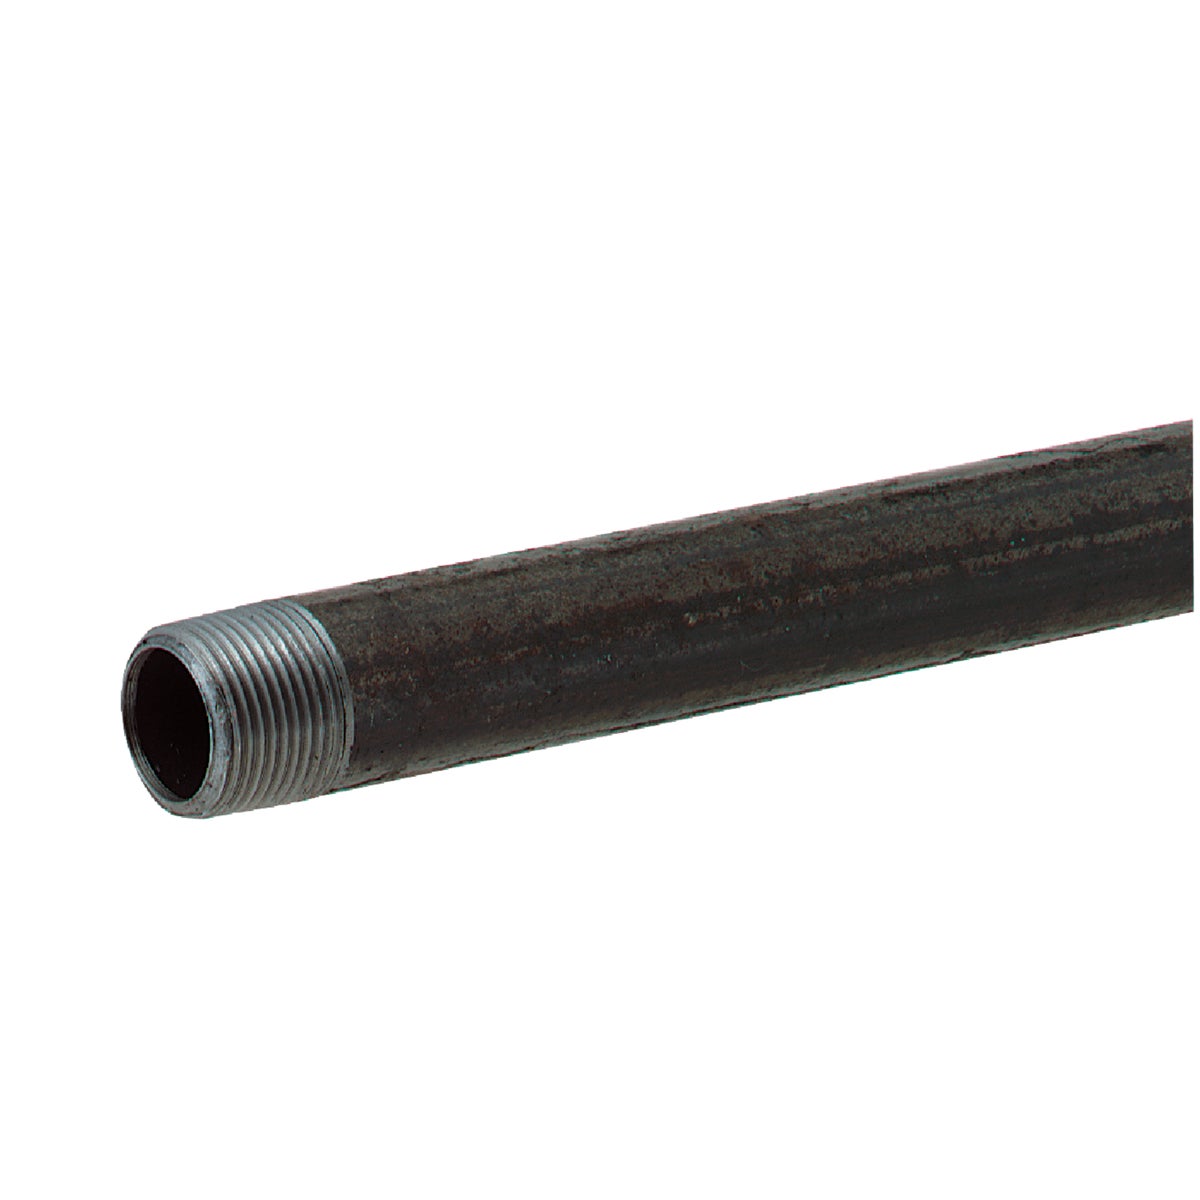 1-1/4X24 BLK RDI-CT PIPE